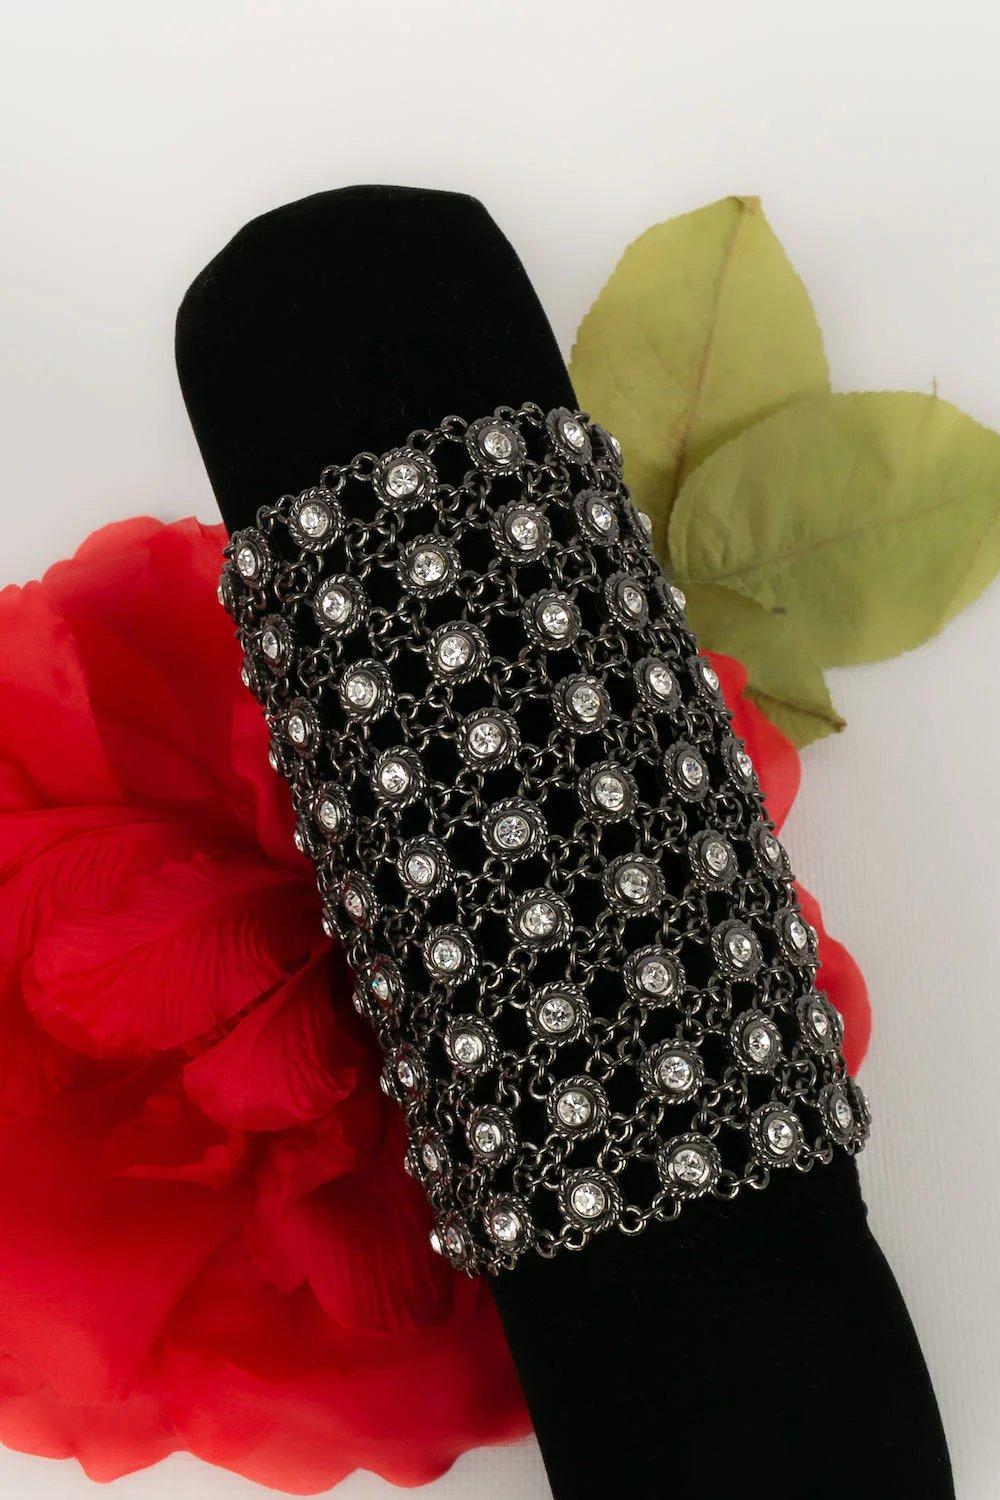 Dior -Silvered metal bracelet paved with rhinestones. Jewel of the 1980's

Additional information:

Dimensions: 
Height: 12 cm 
Width: 21.5 cm

Condition: Very good condition

Seller Ref number: BRA163